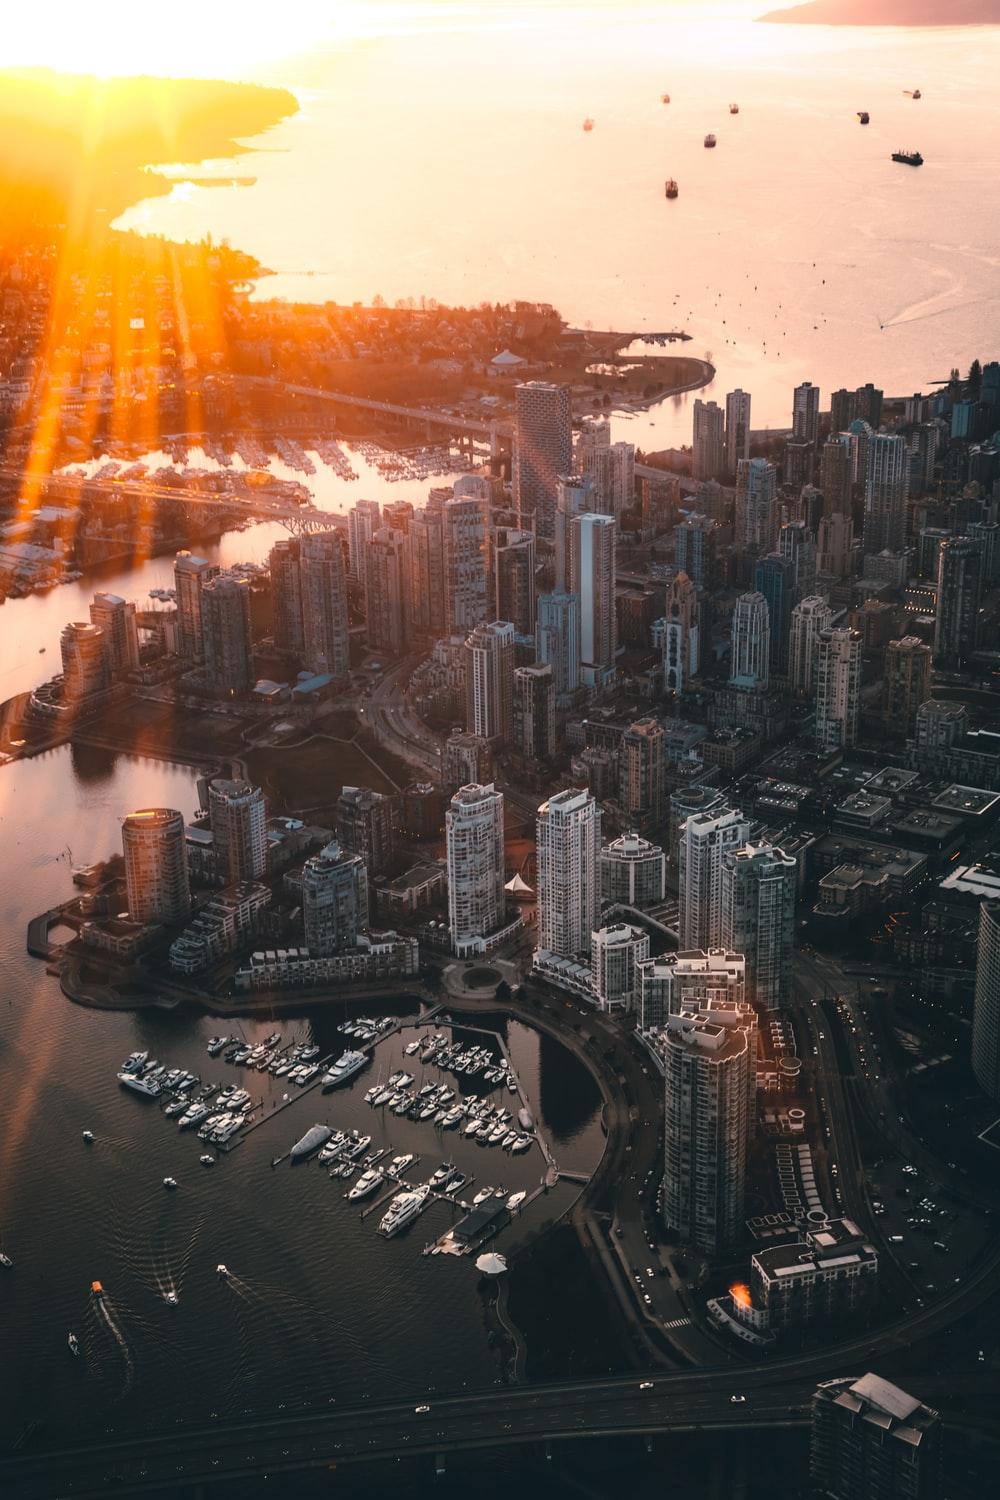 Vancouver Picture. Download Free Image